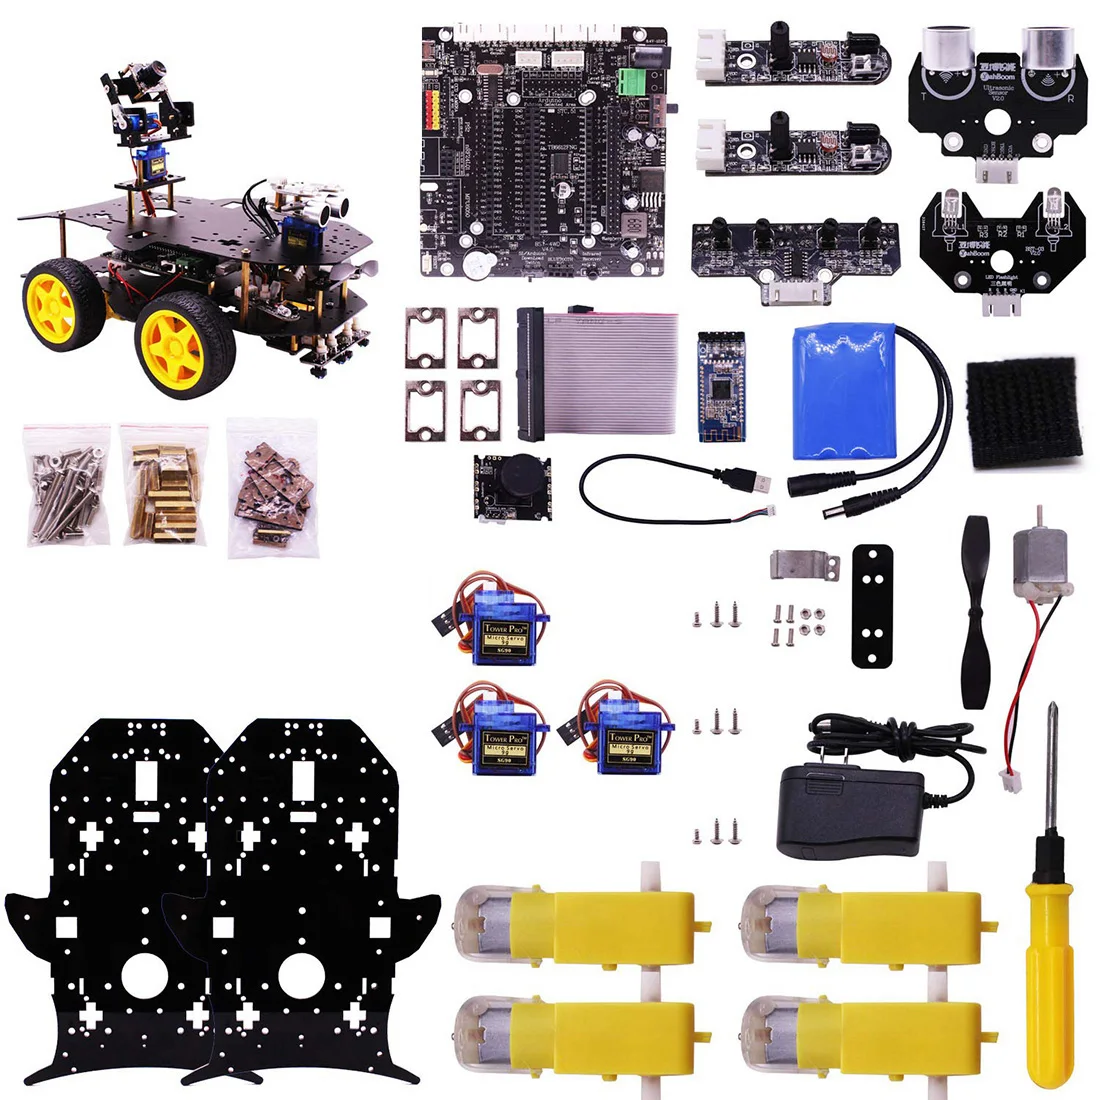 US $122.39 New Hd Camera Programmable Smart Robot Car Kit With 4wd Electronics Robotics Kit For TeensWithoutRaspberry Pi